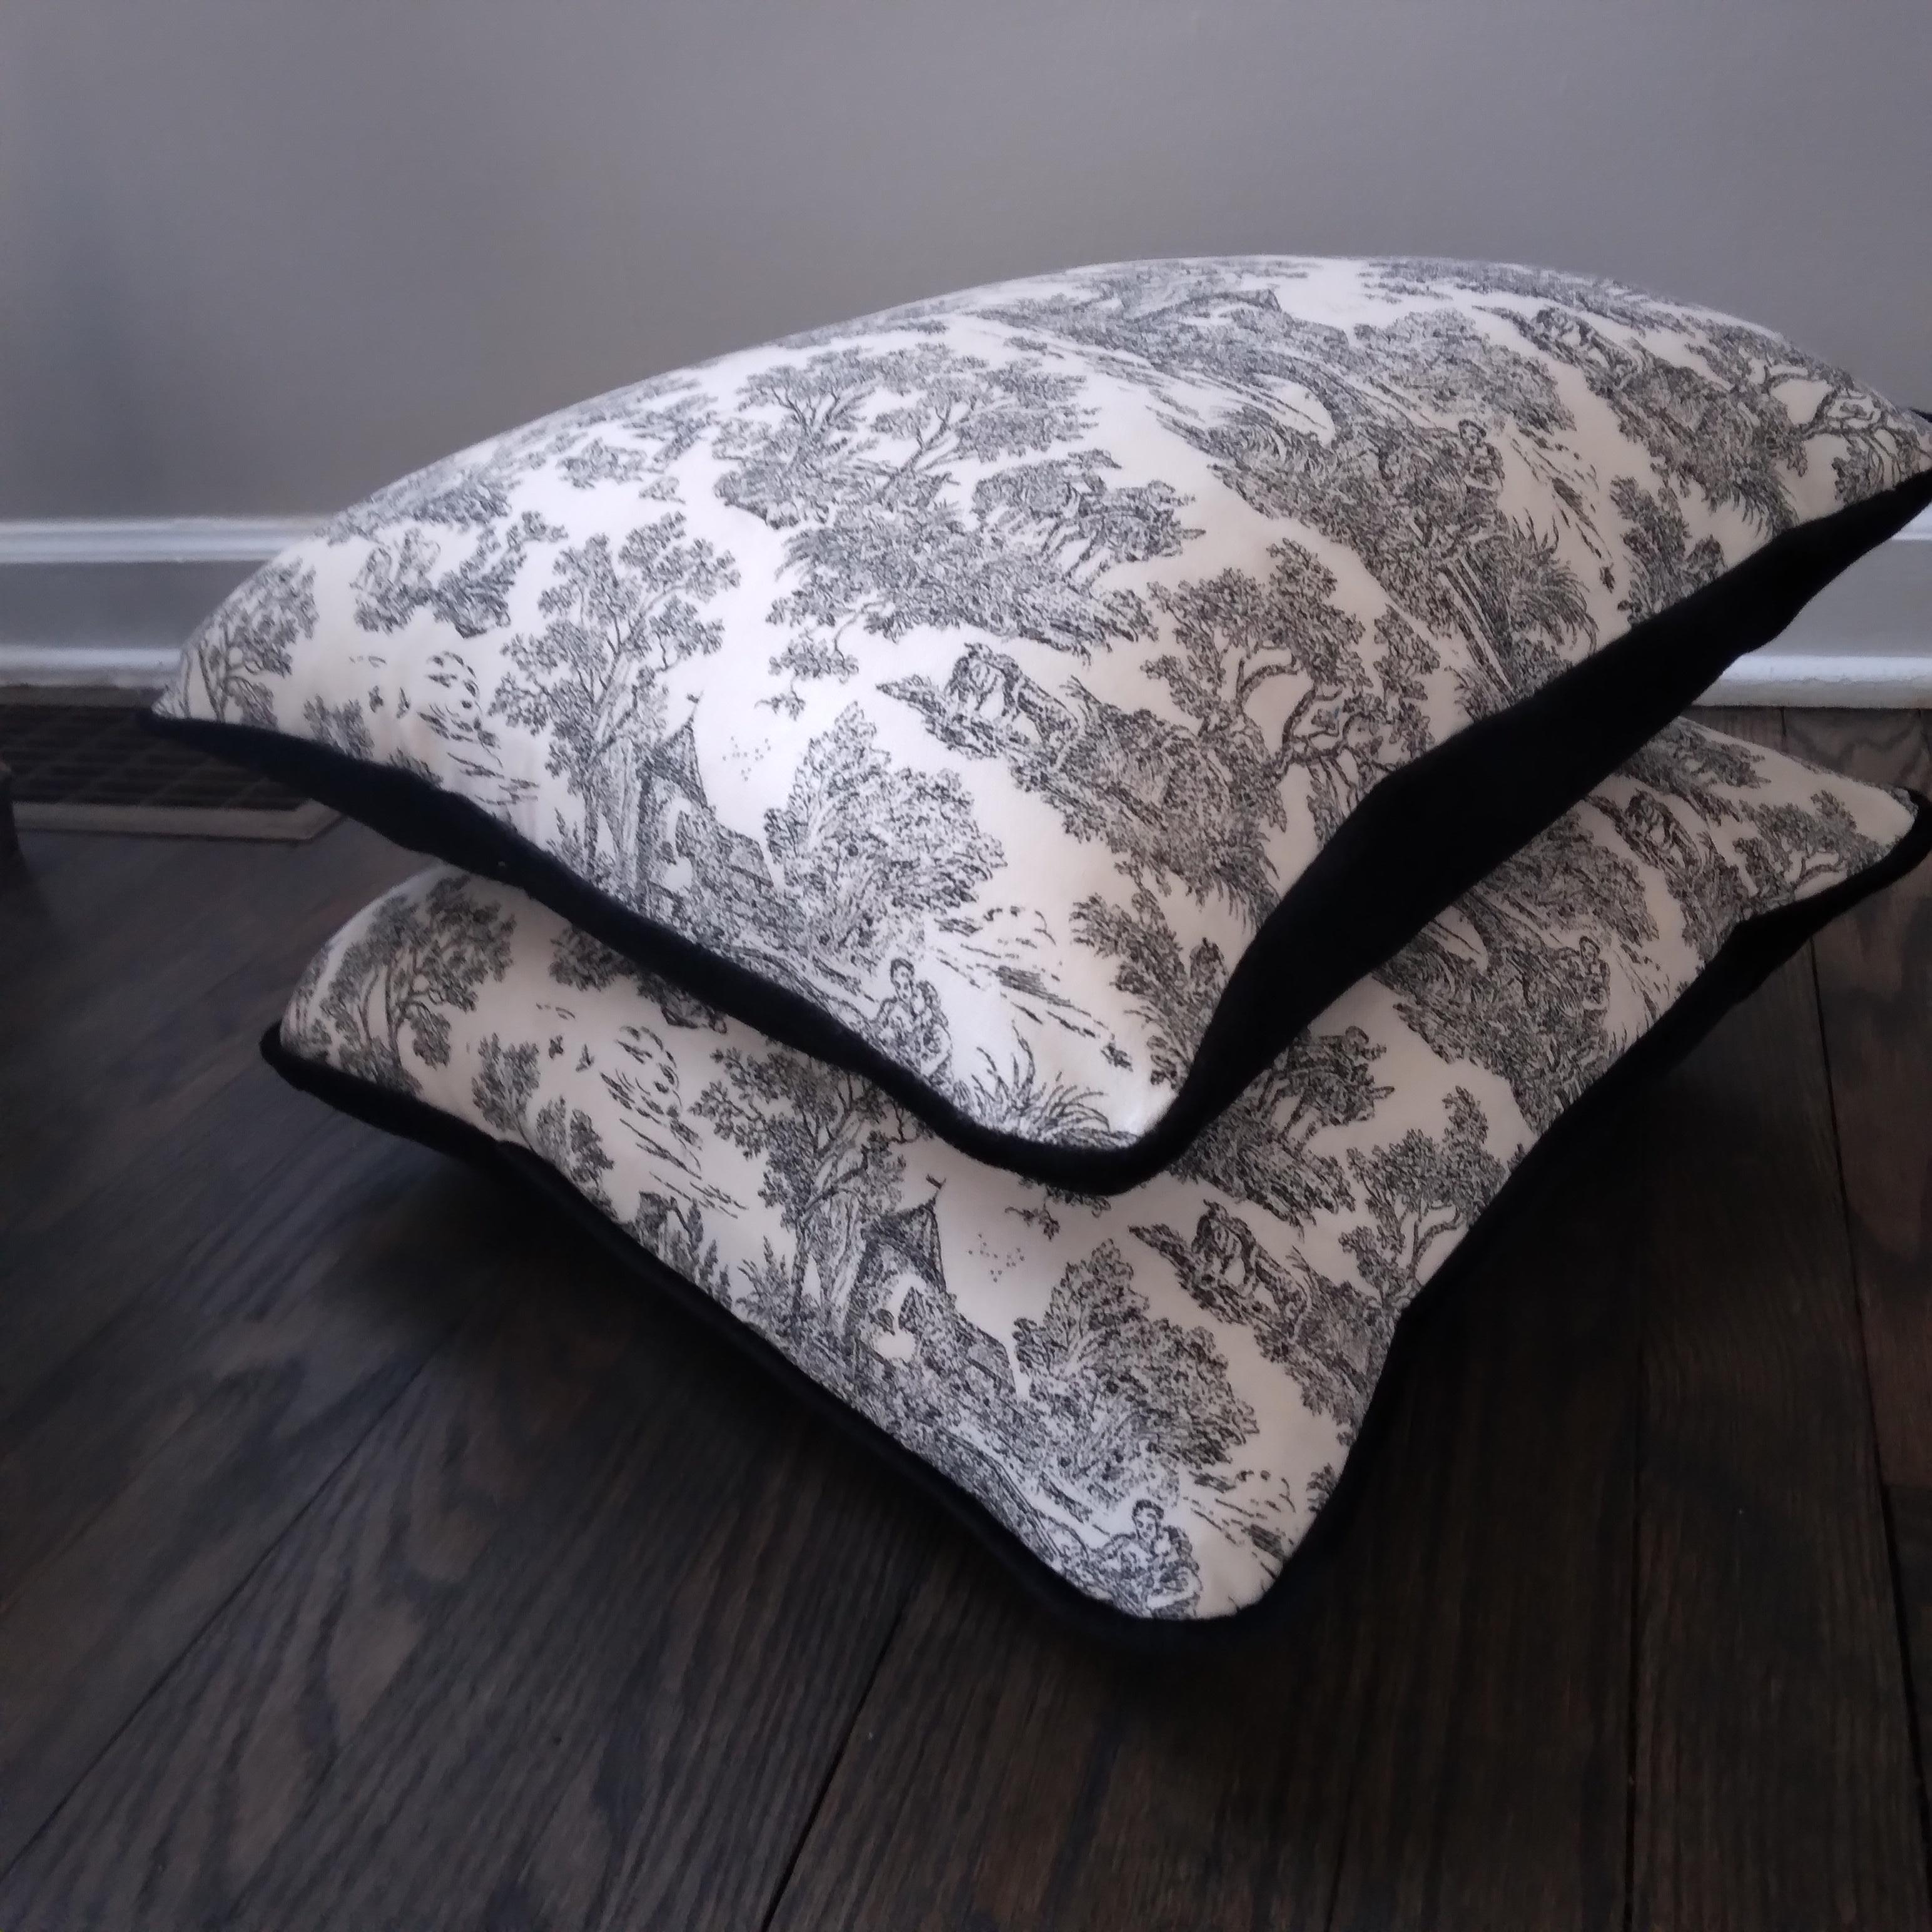 Black and White Toile Print Pillows with Black Velvet Backing - a pair For Sale 1